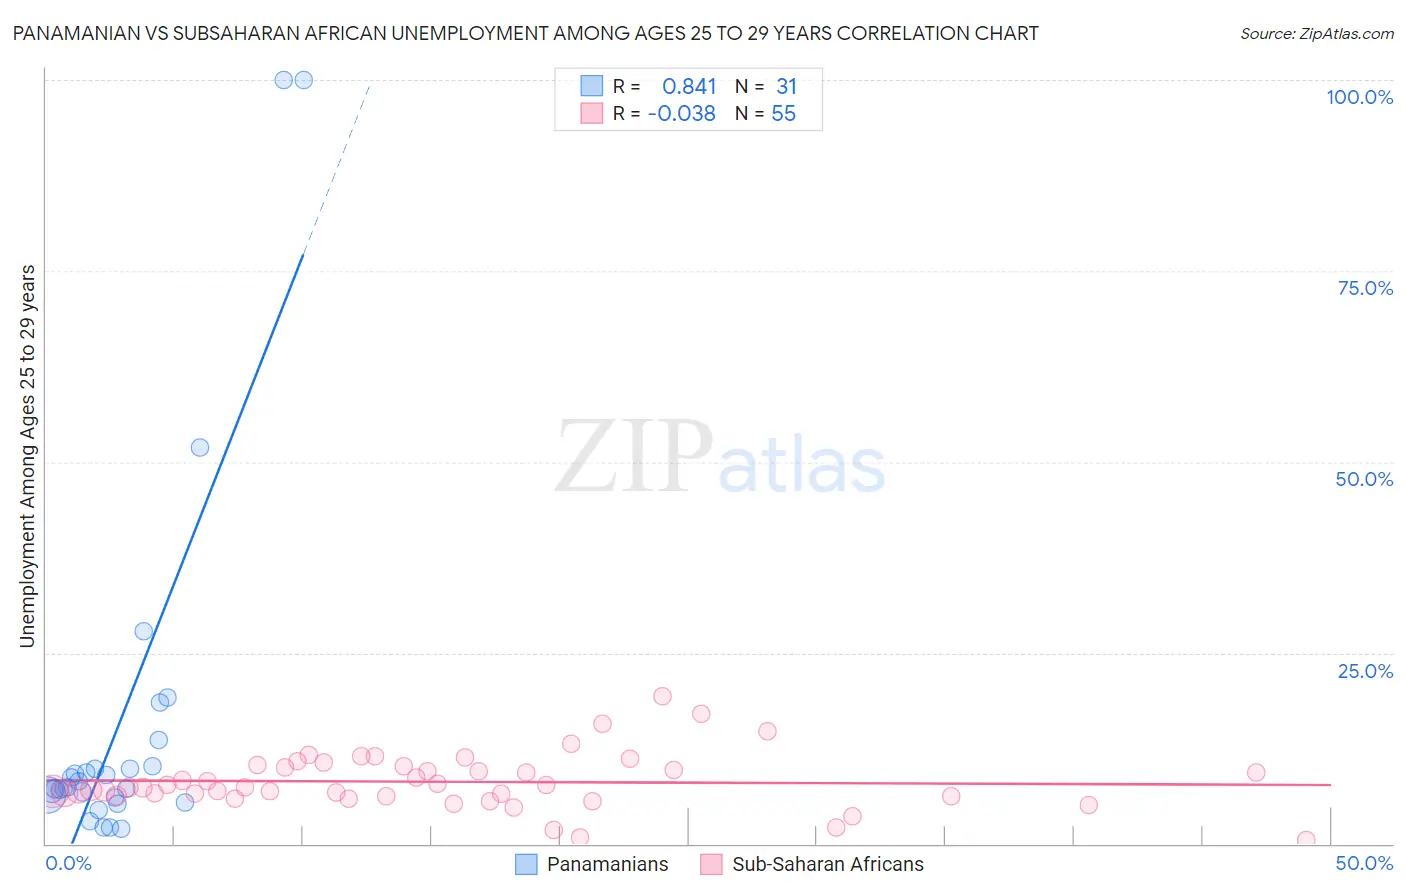 Panamanian vs Subsaharan African Unemployment Among Ages 25 to 29 years